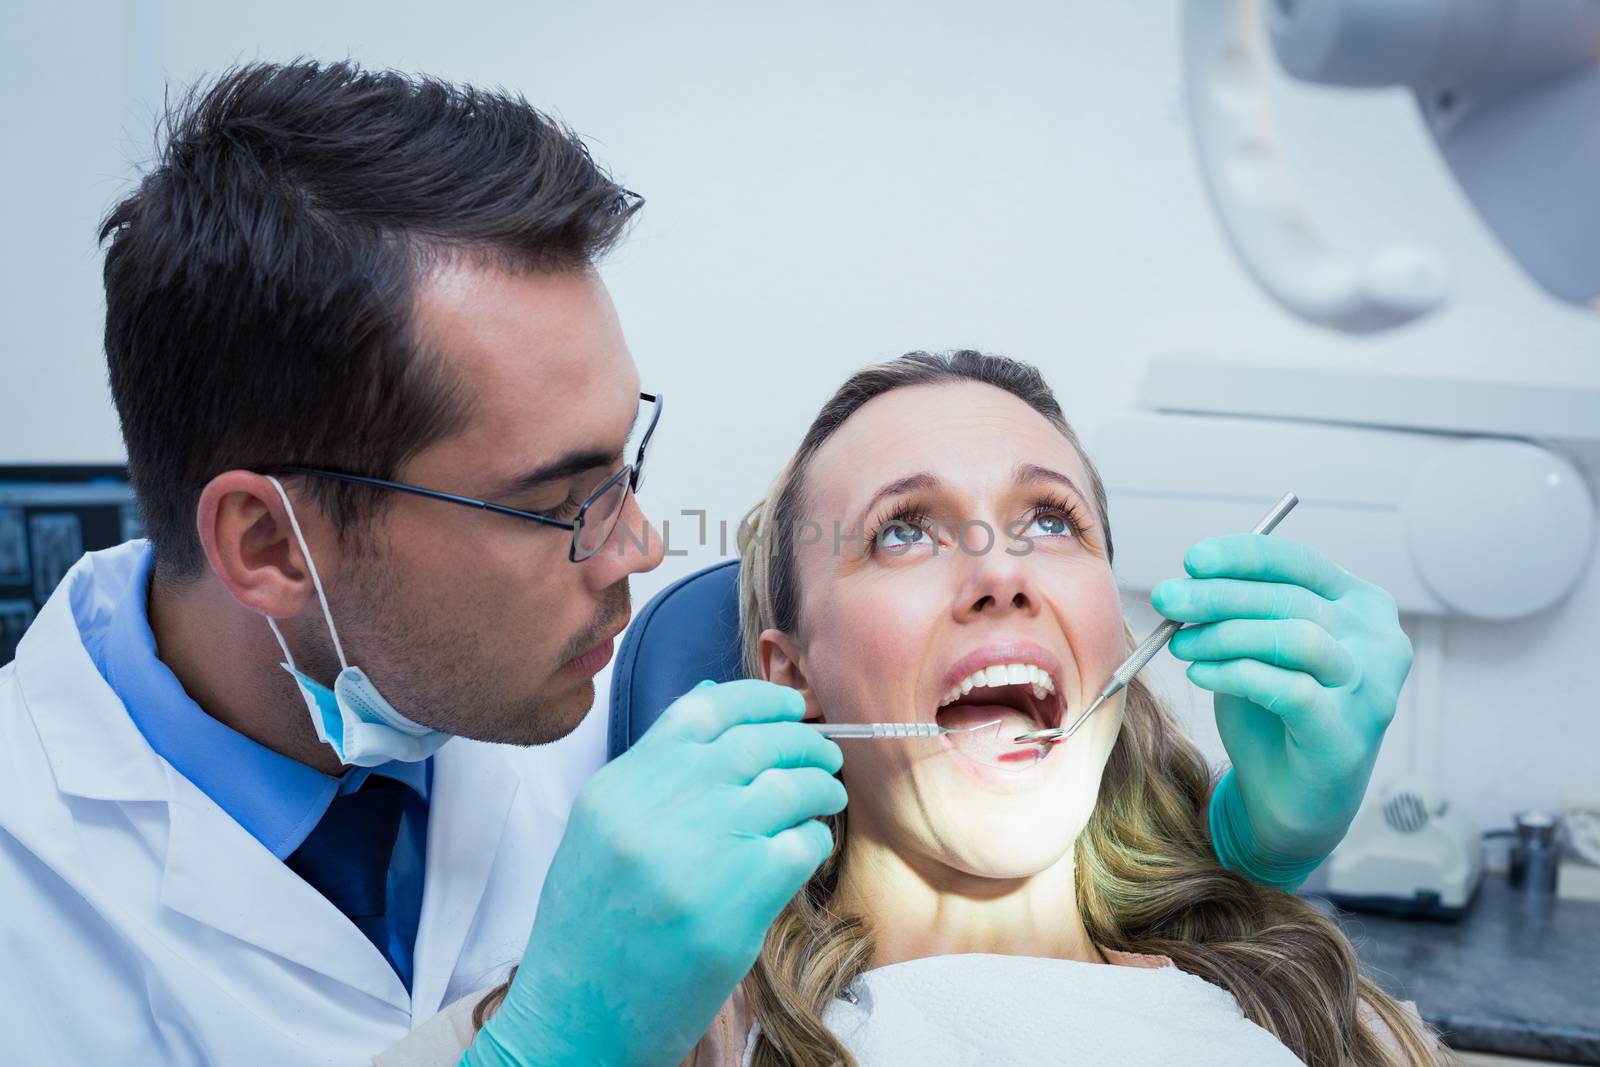 Dentist examining young womans teeth in the dentists chair